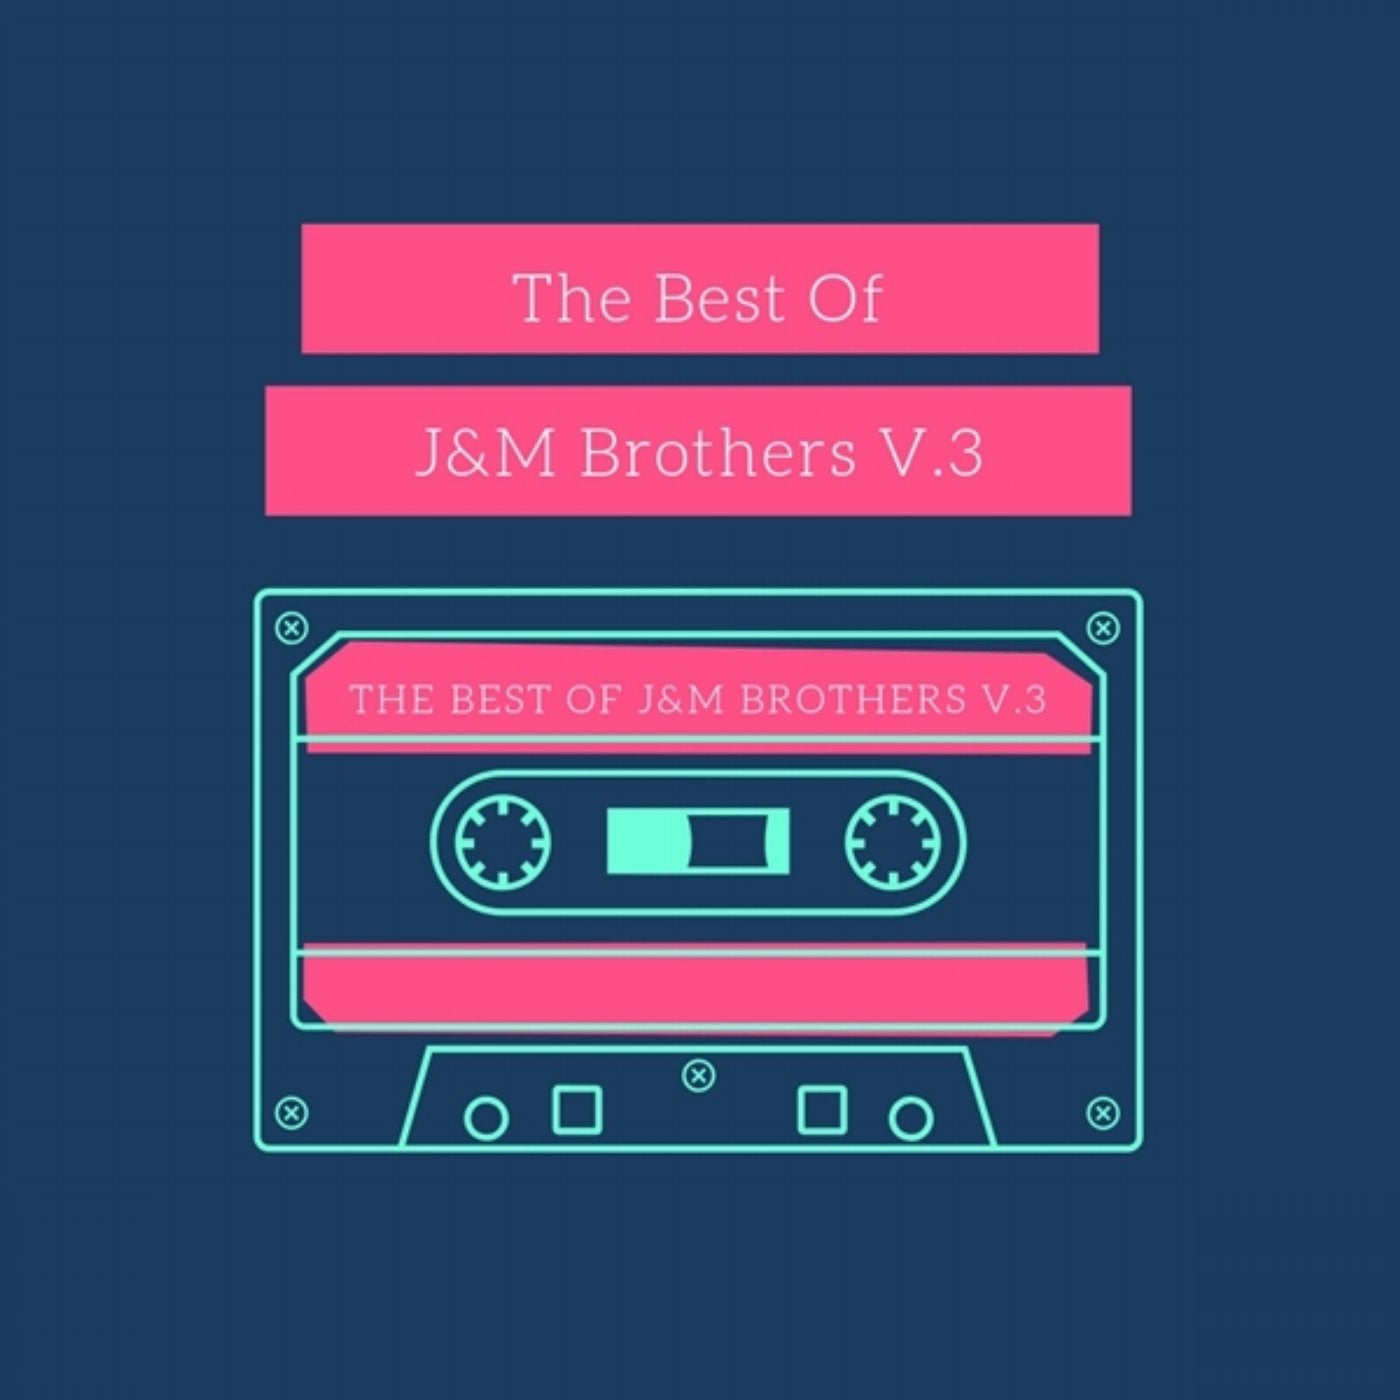 The Best Of J&M Brothers V.3